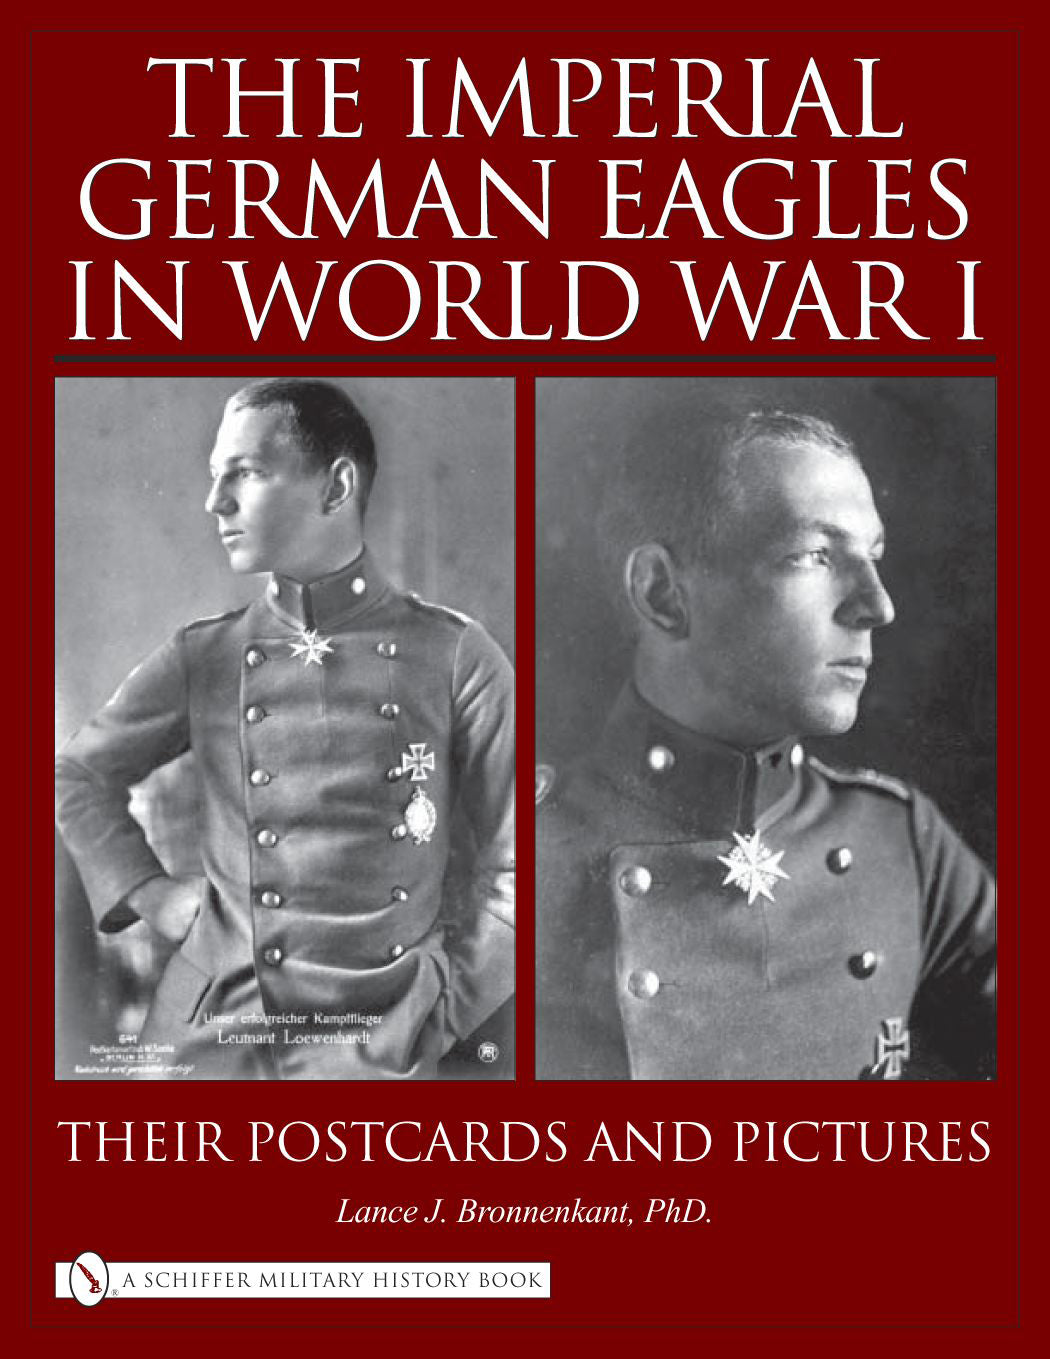 The Imperial German Eagles in World War I, Vol. 2